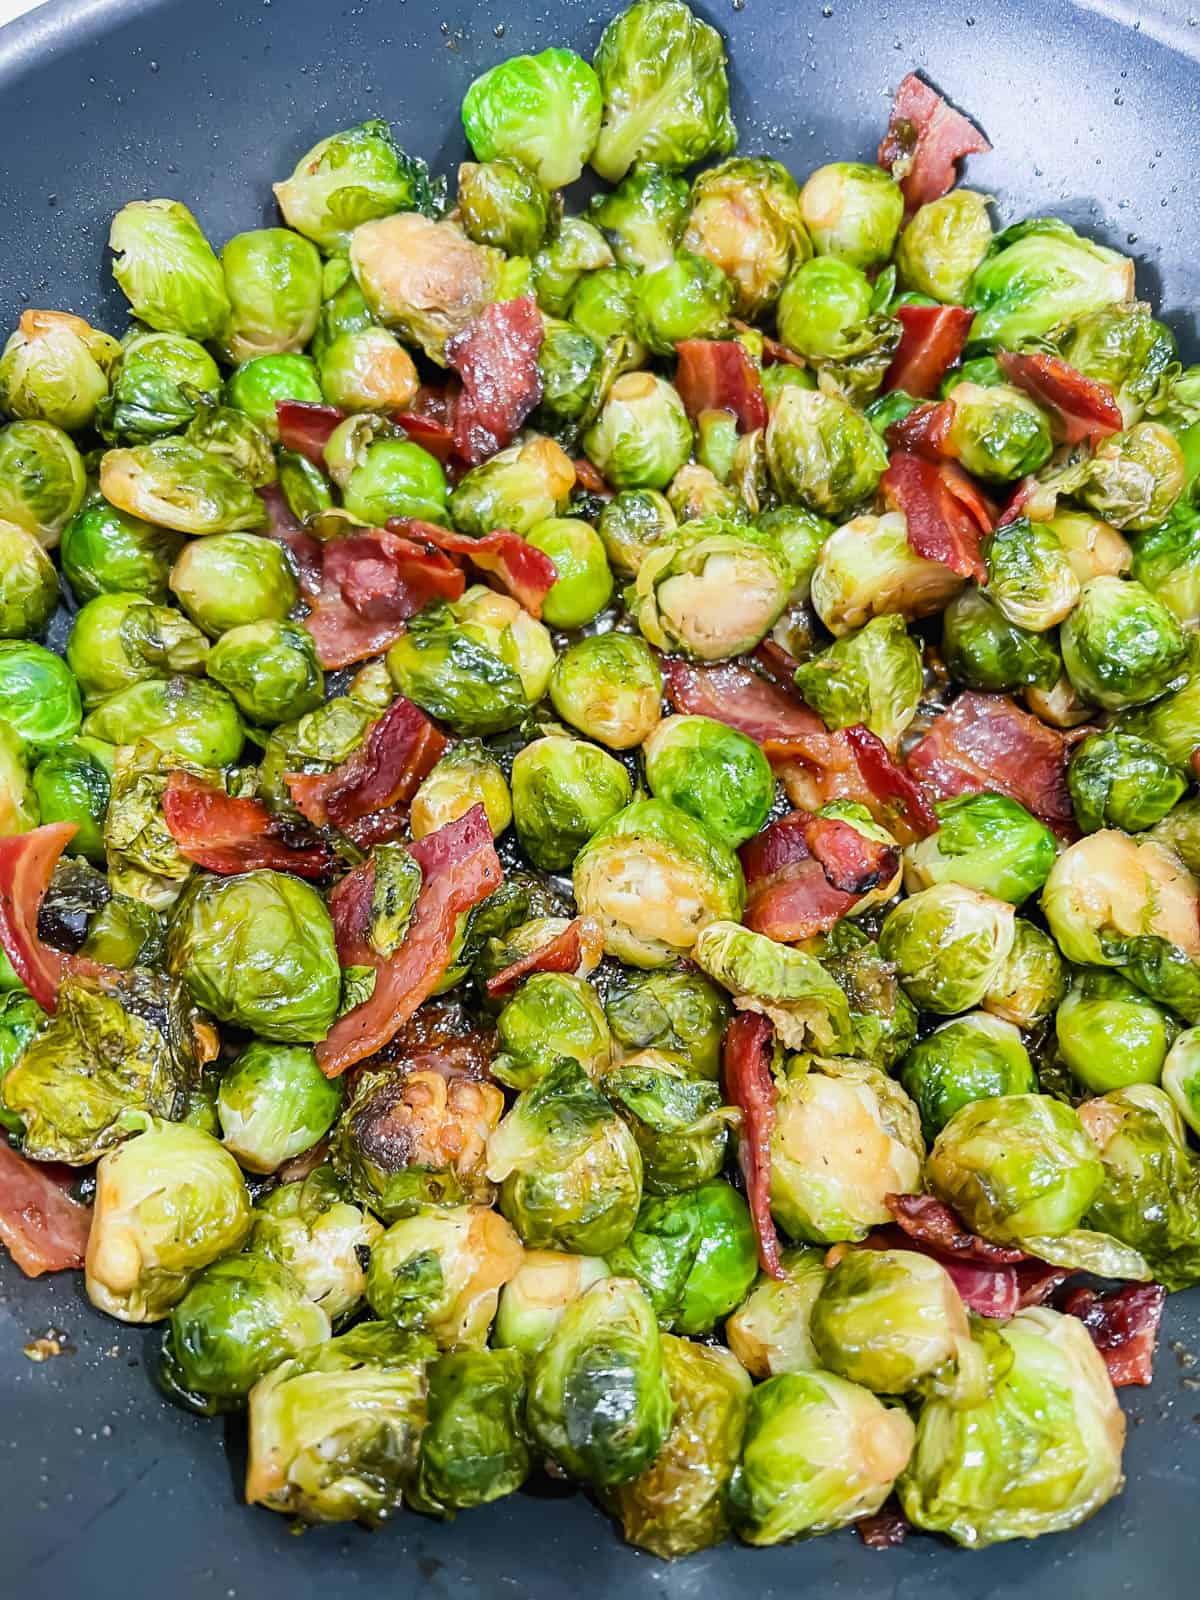 Maple brussel sprouts with bacon cooking in a frying pan.